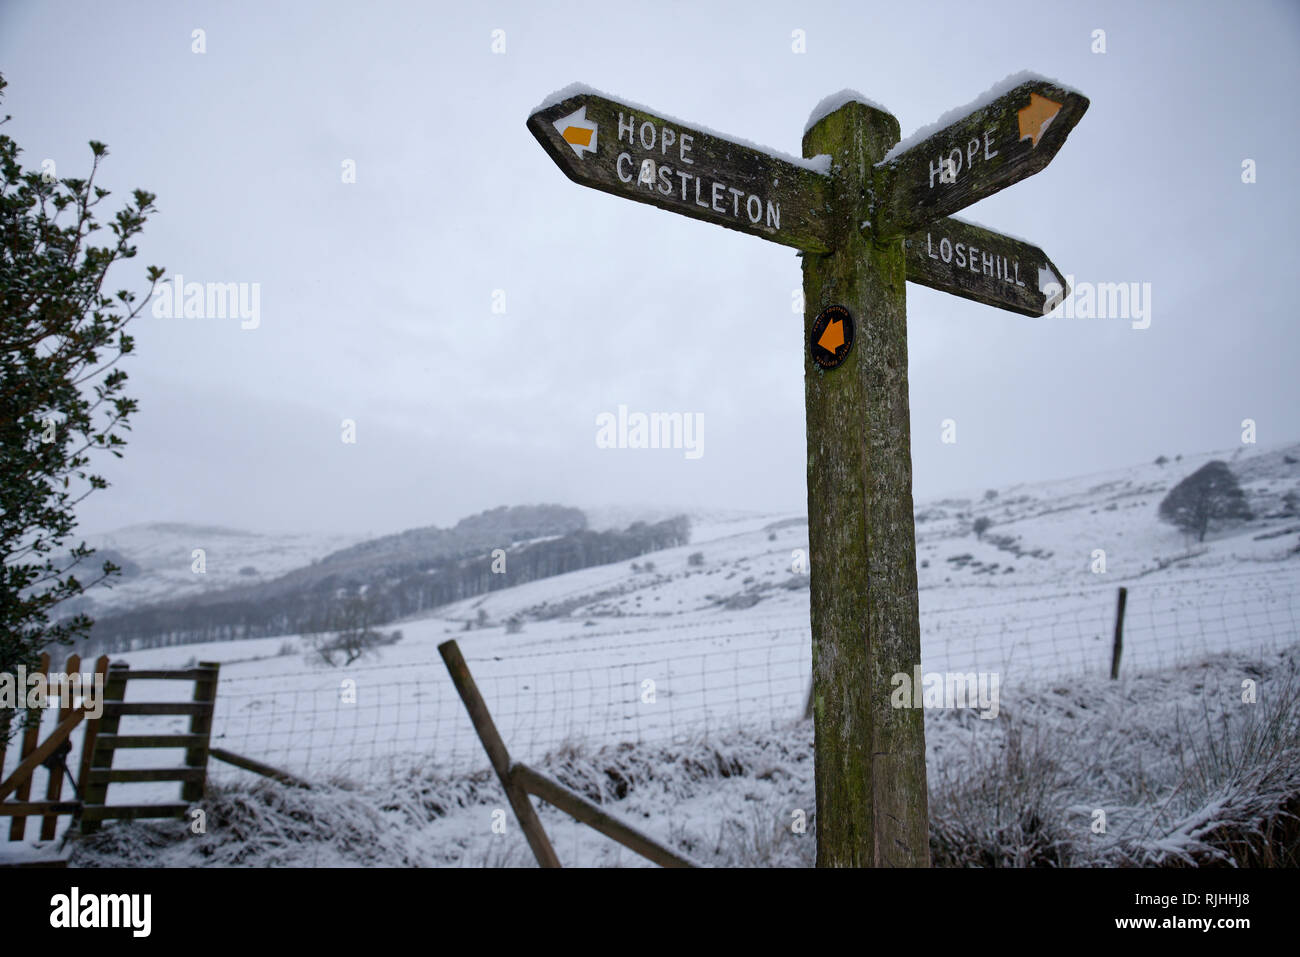 Snowy dawn in the Peak District National Park, England. Twilight light with footpath sign. Hope, Castleton and Losehill signage. Stock Photo